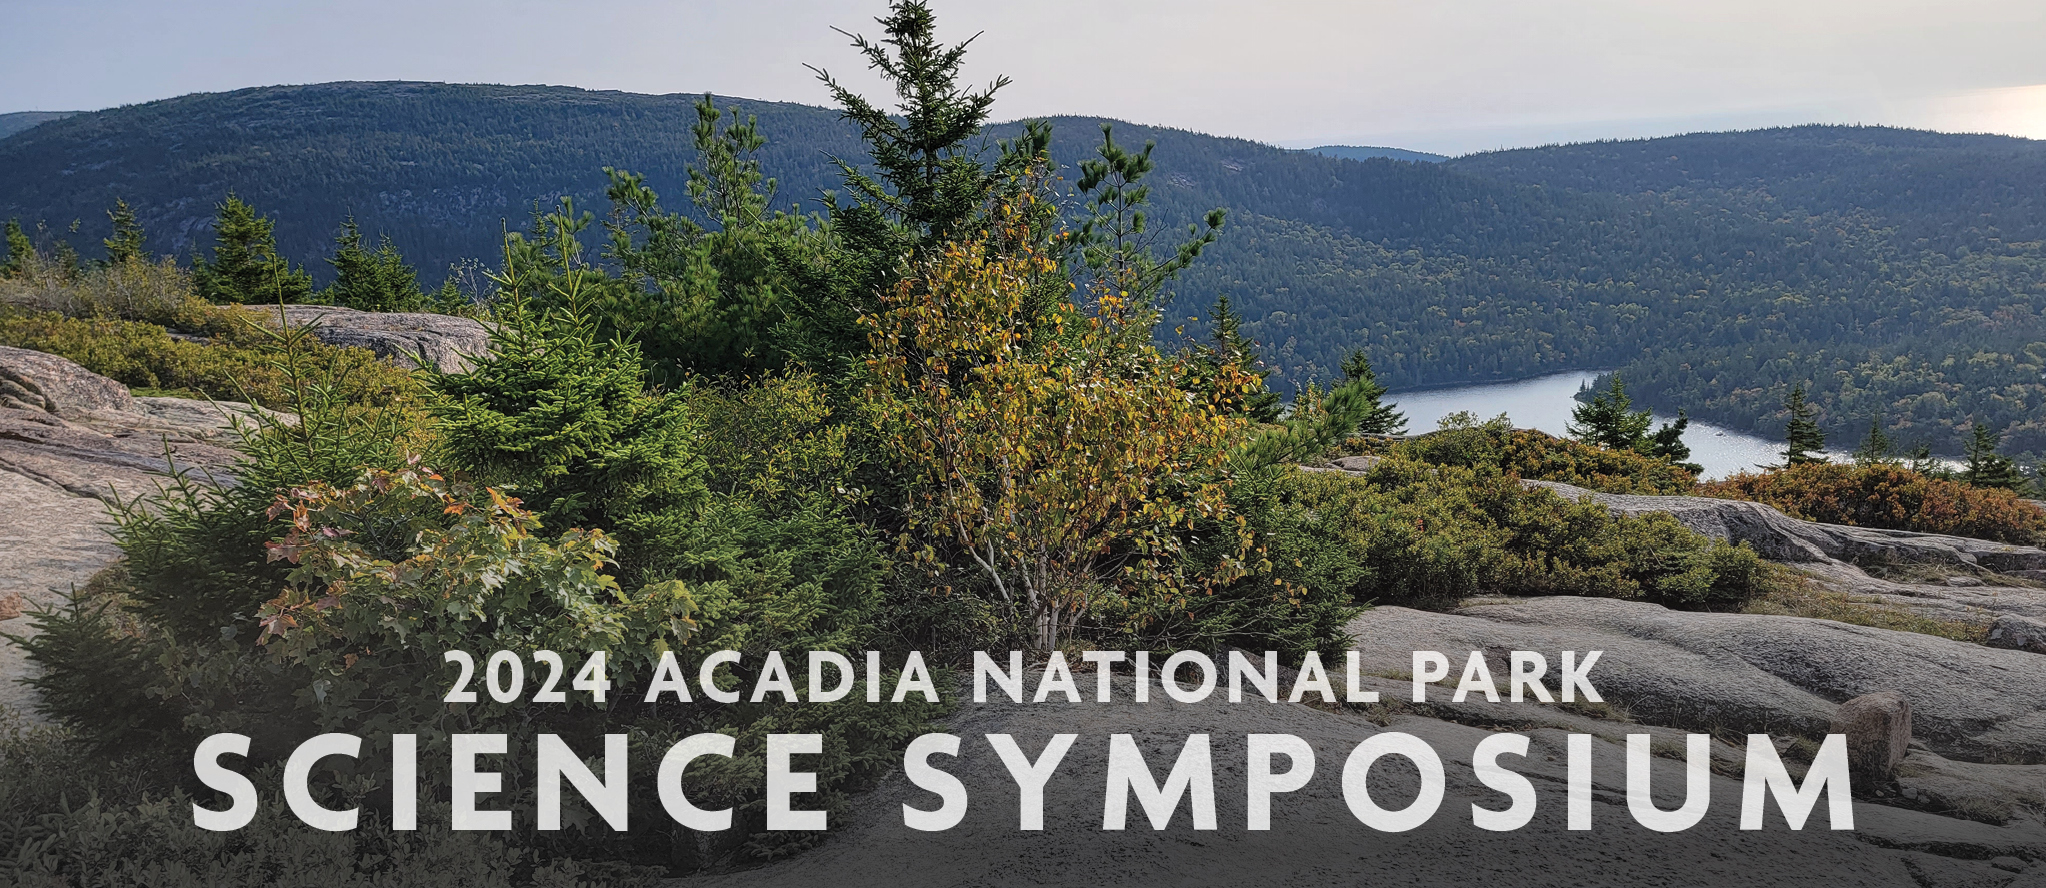 Mountain view at sunrise in Acadia National Park. Overlaid is text that reads: 2024 Acadia National Park Science Symposium.